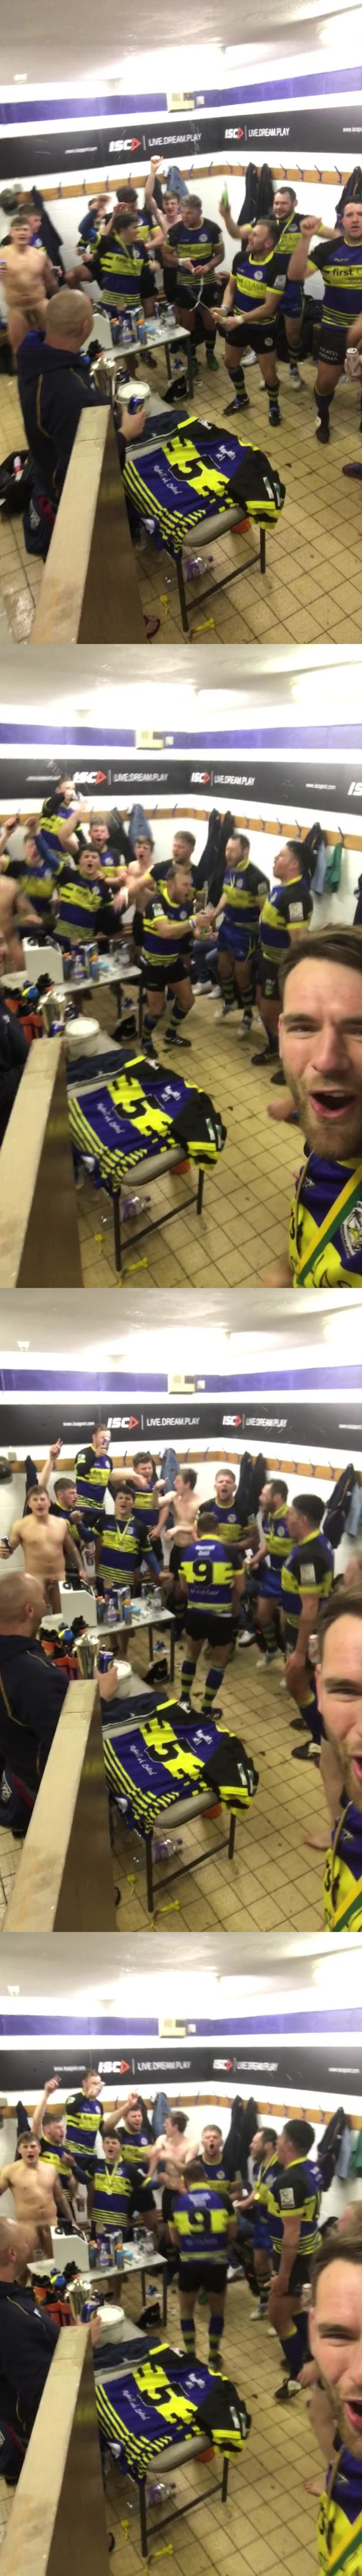 rugger enjoys showing off his dick in the locker room